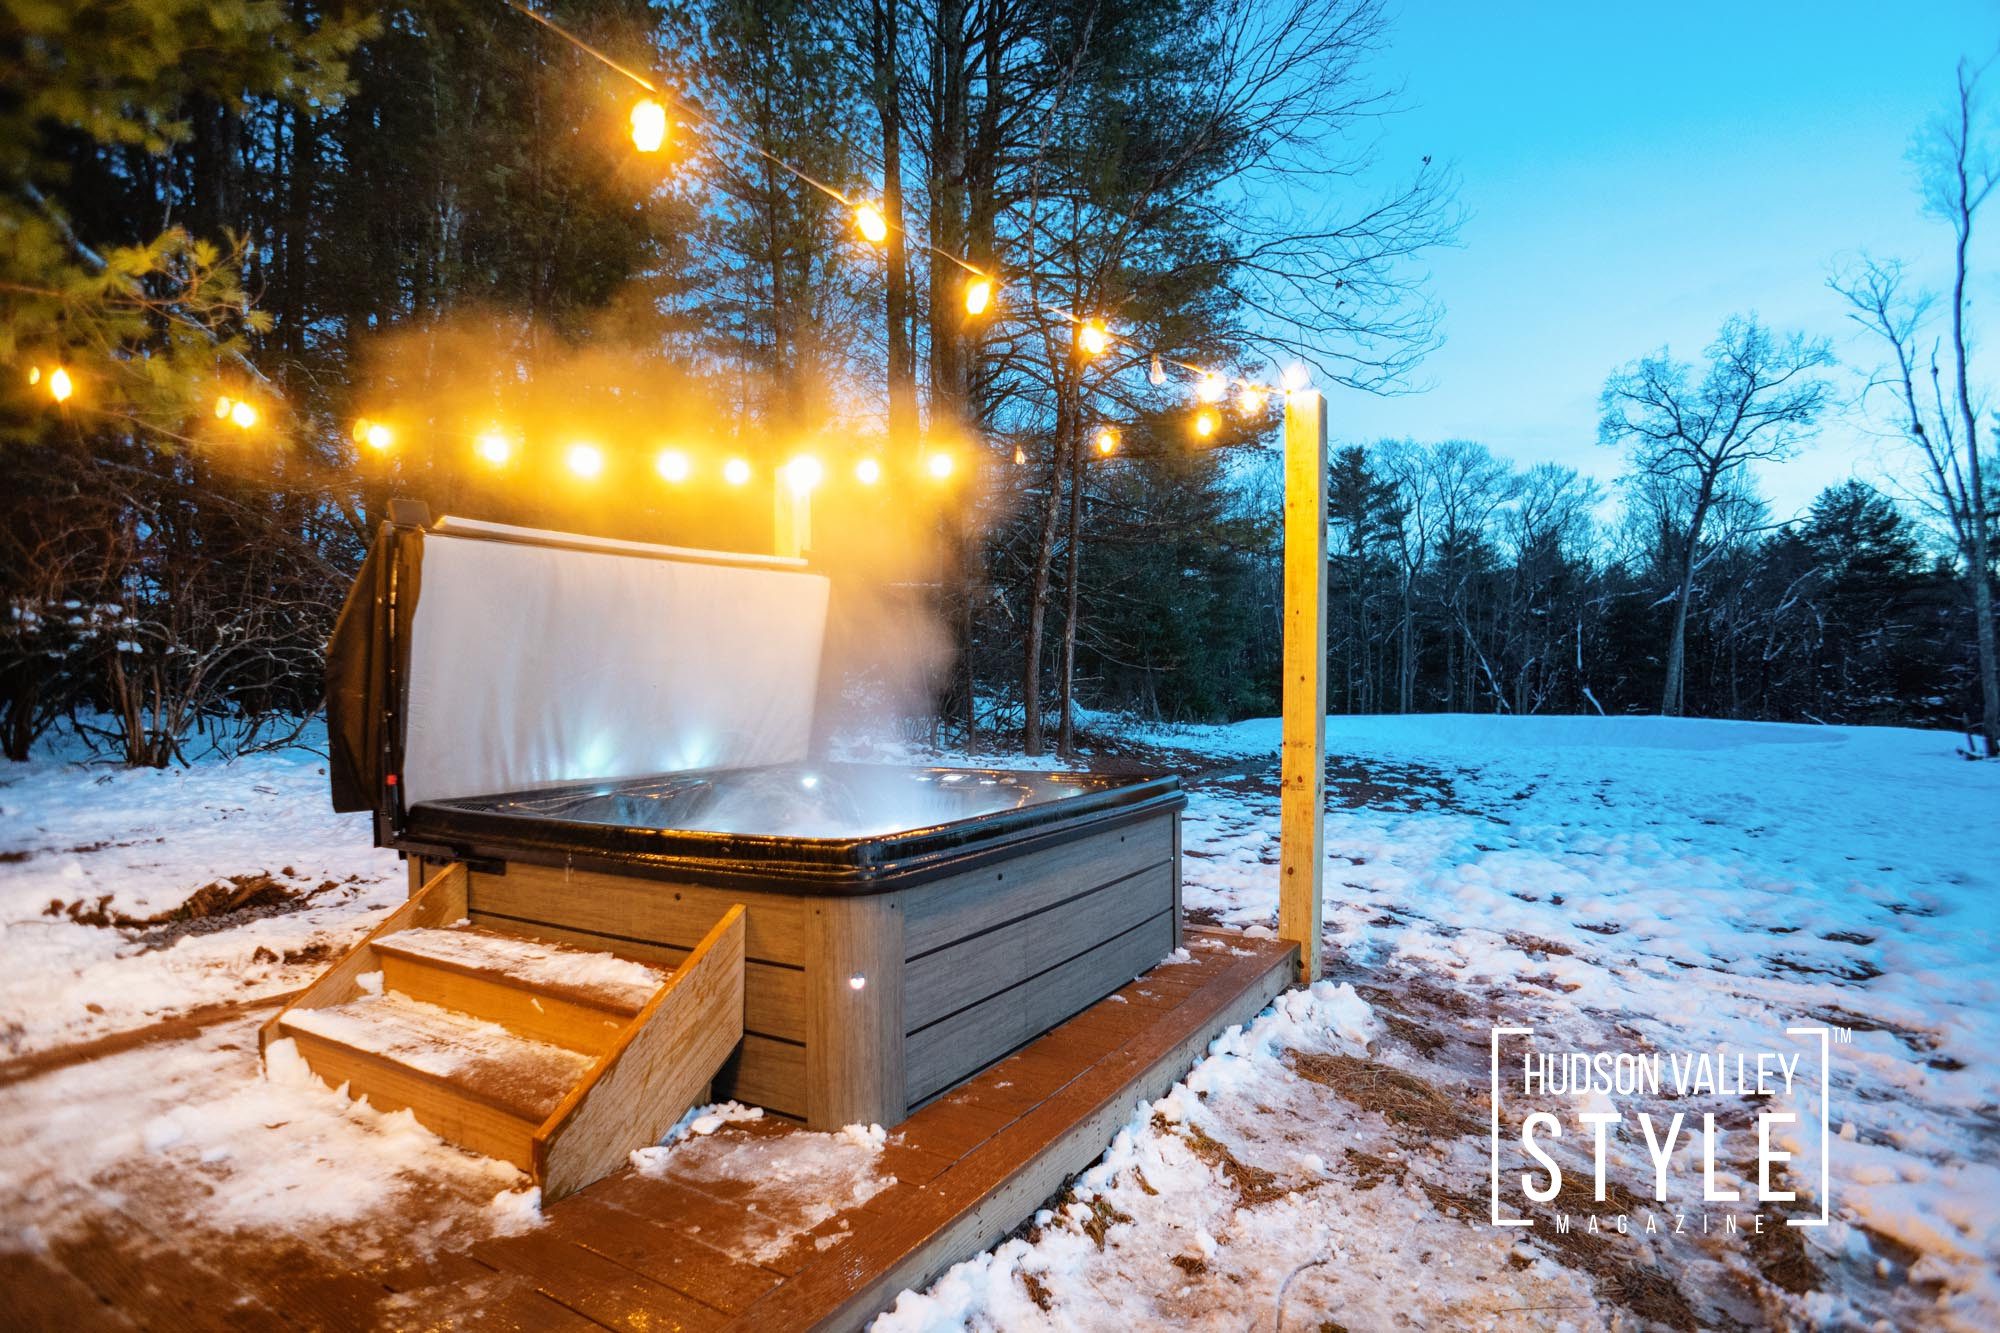 Unwind in Style at Cabin Blhues, a Cozy and Chic Airbnb Cabin in the Woods with a Hot Tub – Airbnb Review by Photographer Maxwell Alexander